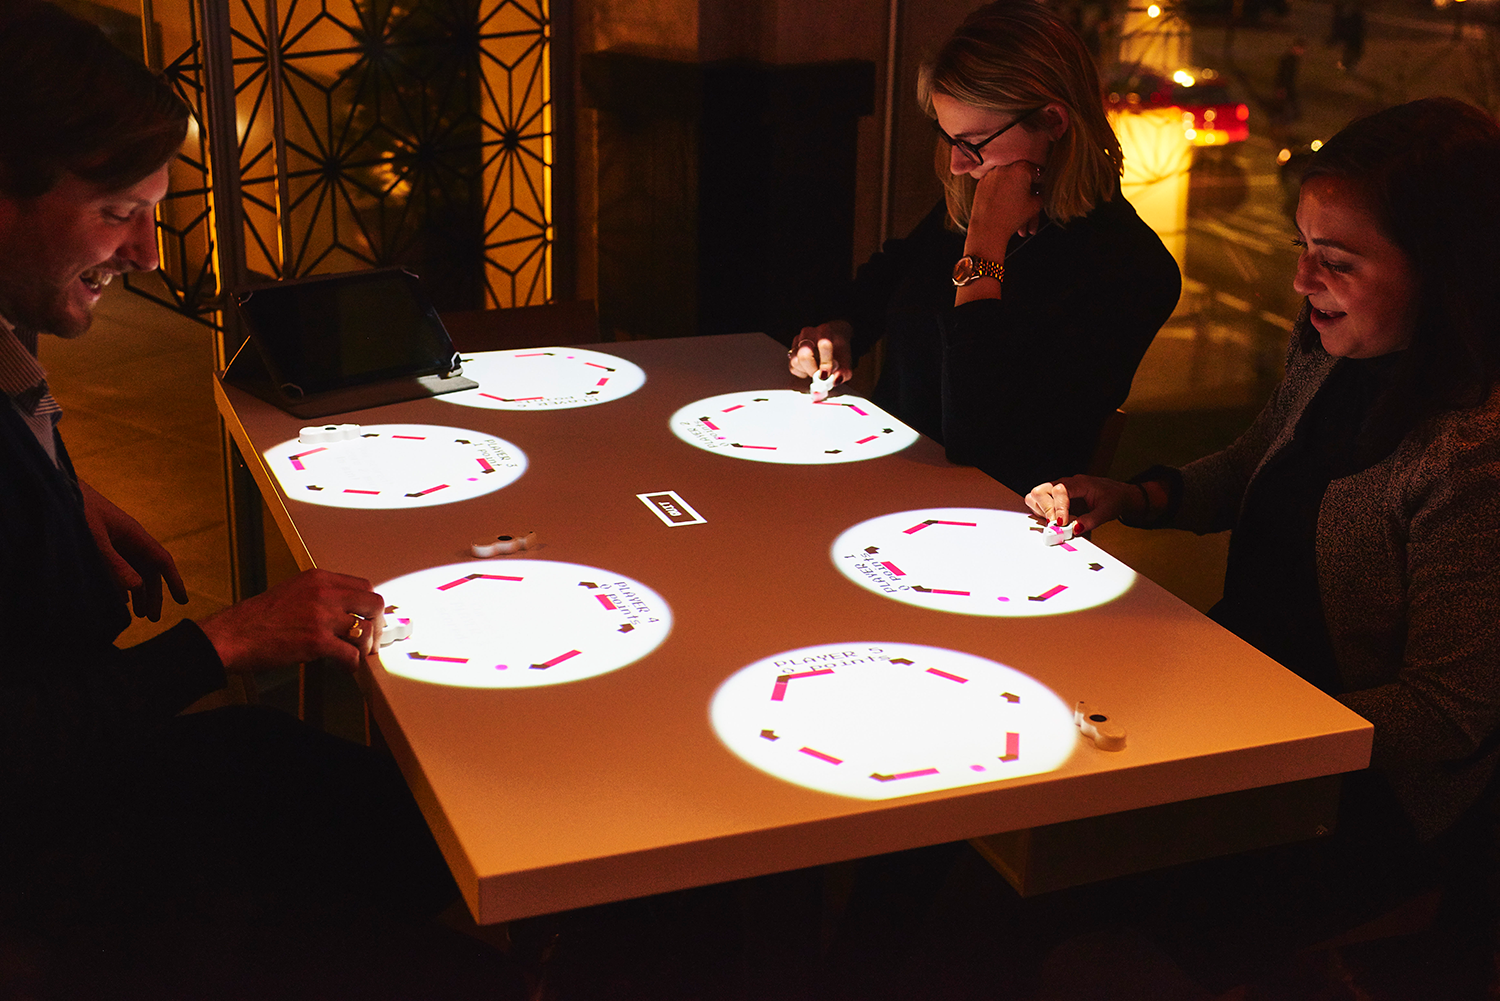  Guests can also play games, such as pong, memory and puzzles. 